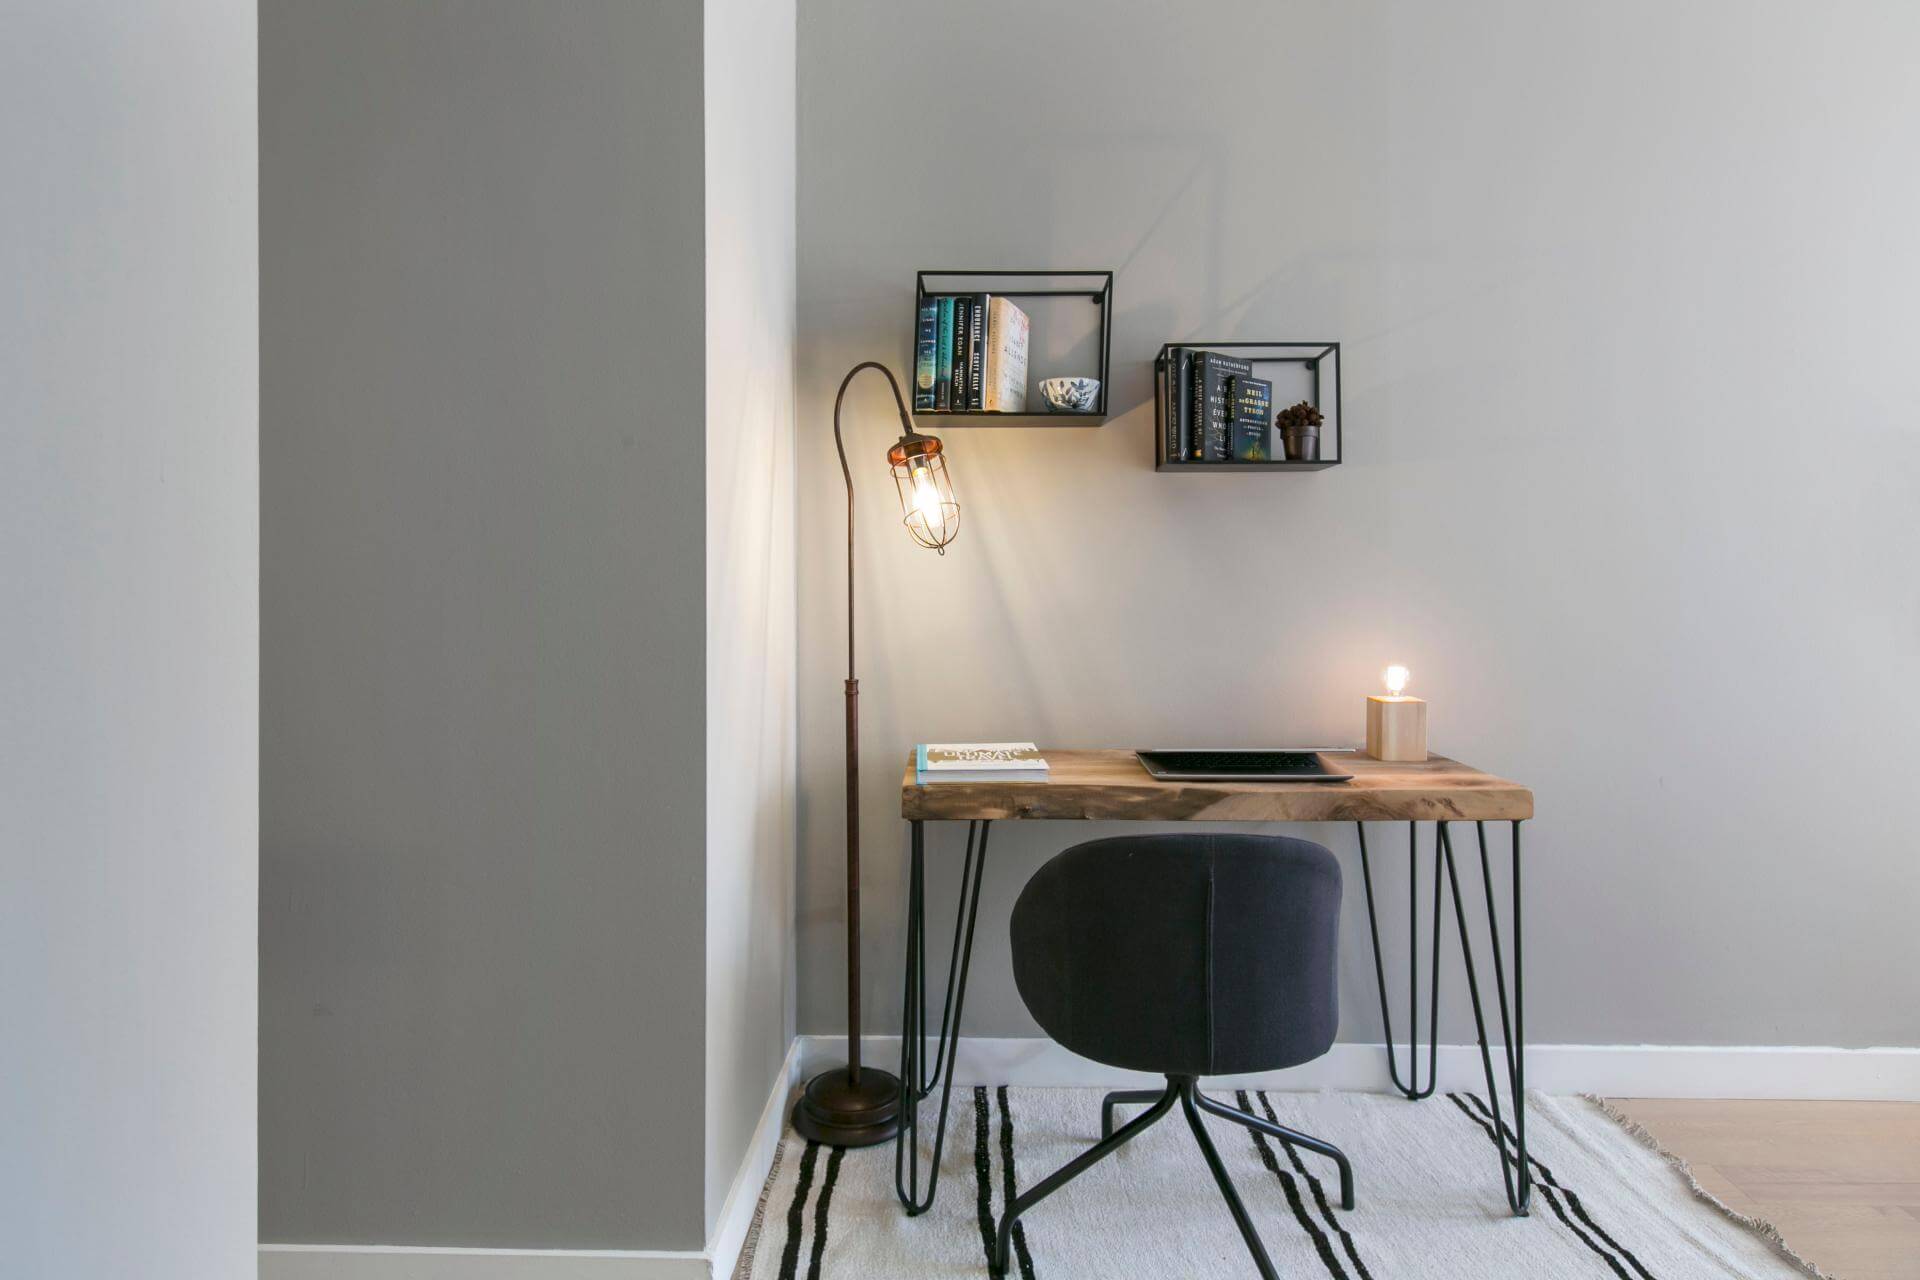 home office ideas Blueground desk space in an NYC apartment. There is a wooden table with a laptop, a book and a lamp on it and a black chair in front of the chair. Next there is a floor lamp and underneath there is a white rug with black stripes.